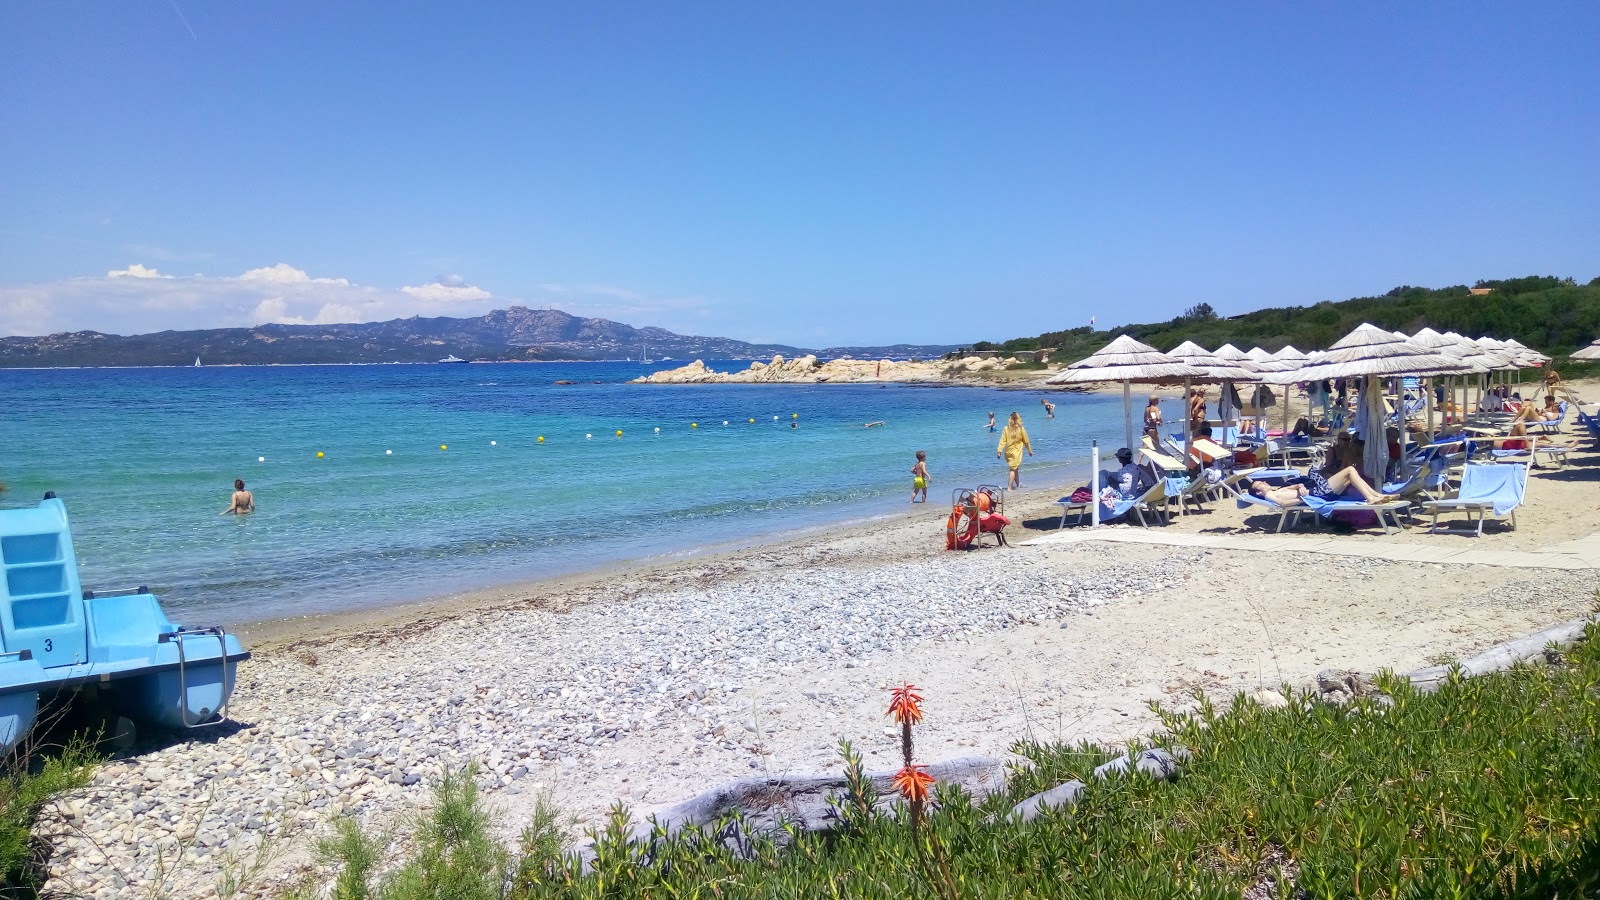 Photo of Spiaggia dei Sassi with blue water surface